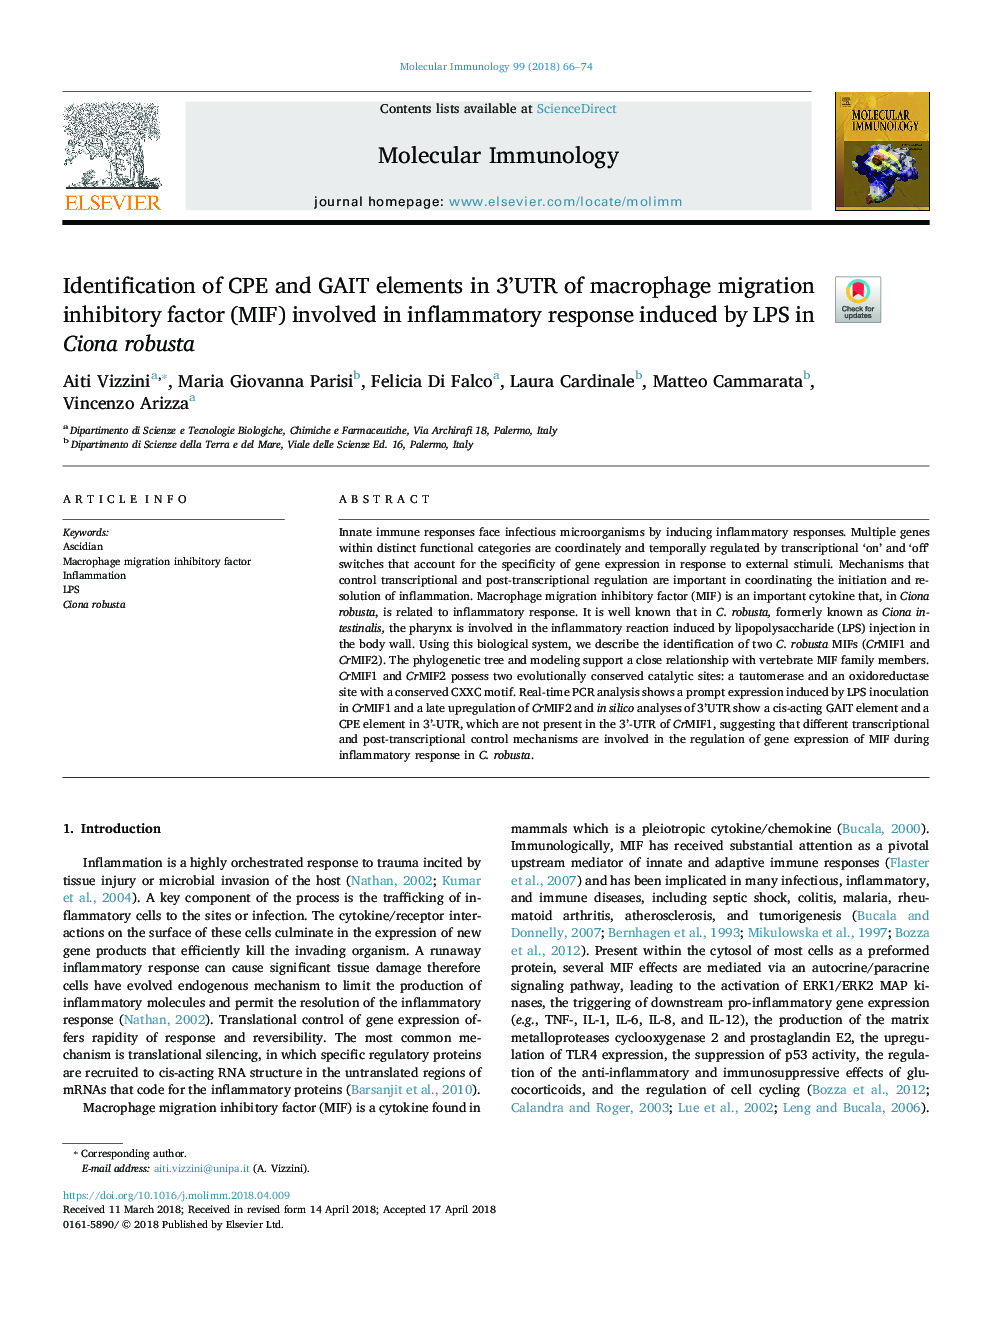 Identification of CPE and GAIT elements in 3'UTR of macrophage migration inhibitory factor (MIF) involved in inflammatory response induced by LPS in Ciona robusta